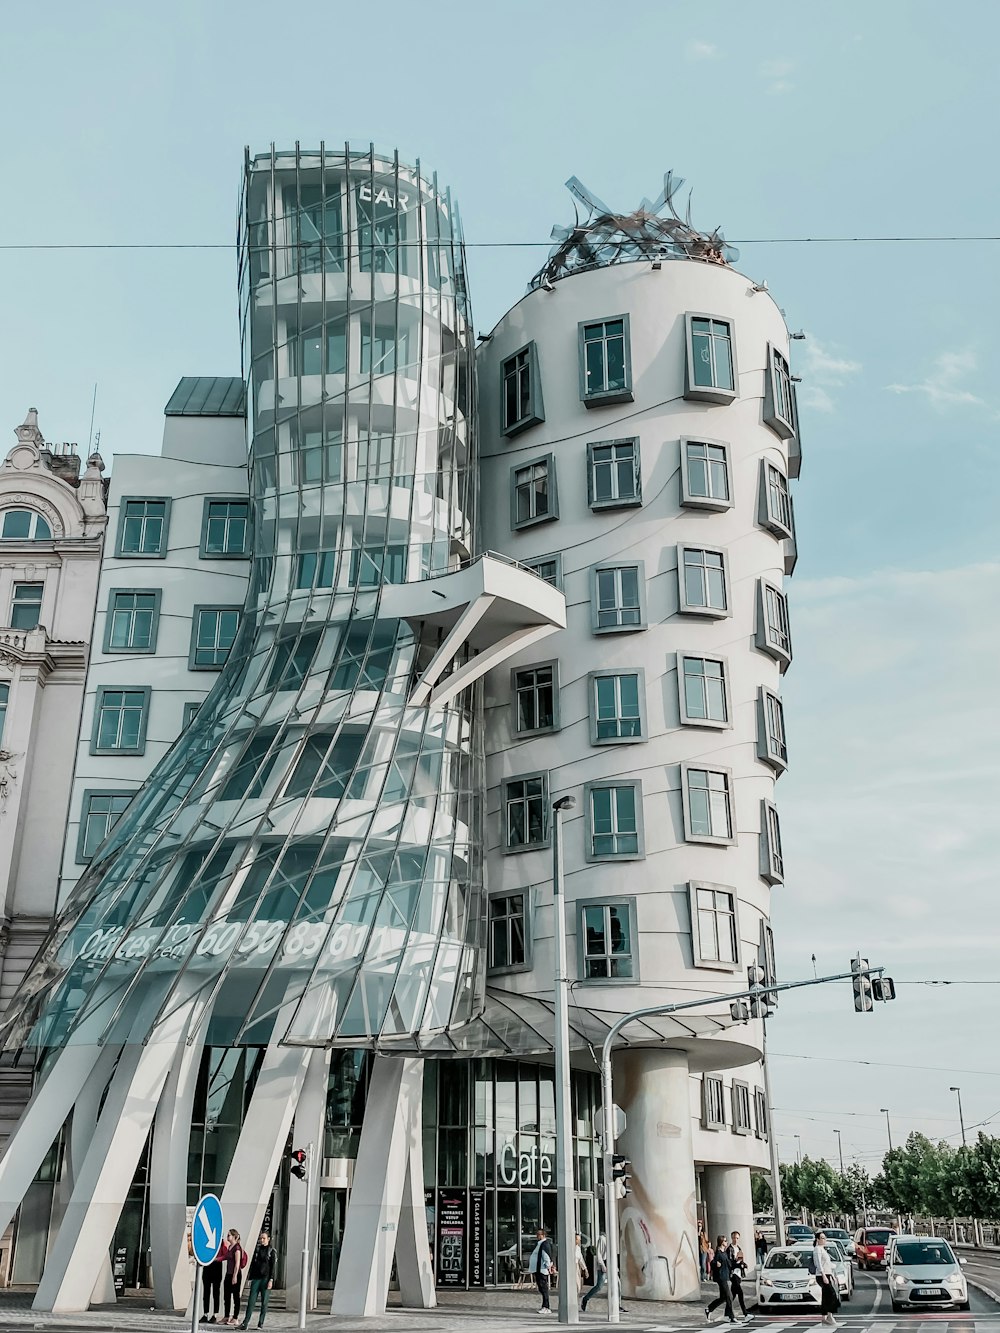 Dancing House with a glass front